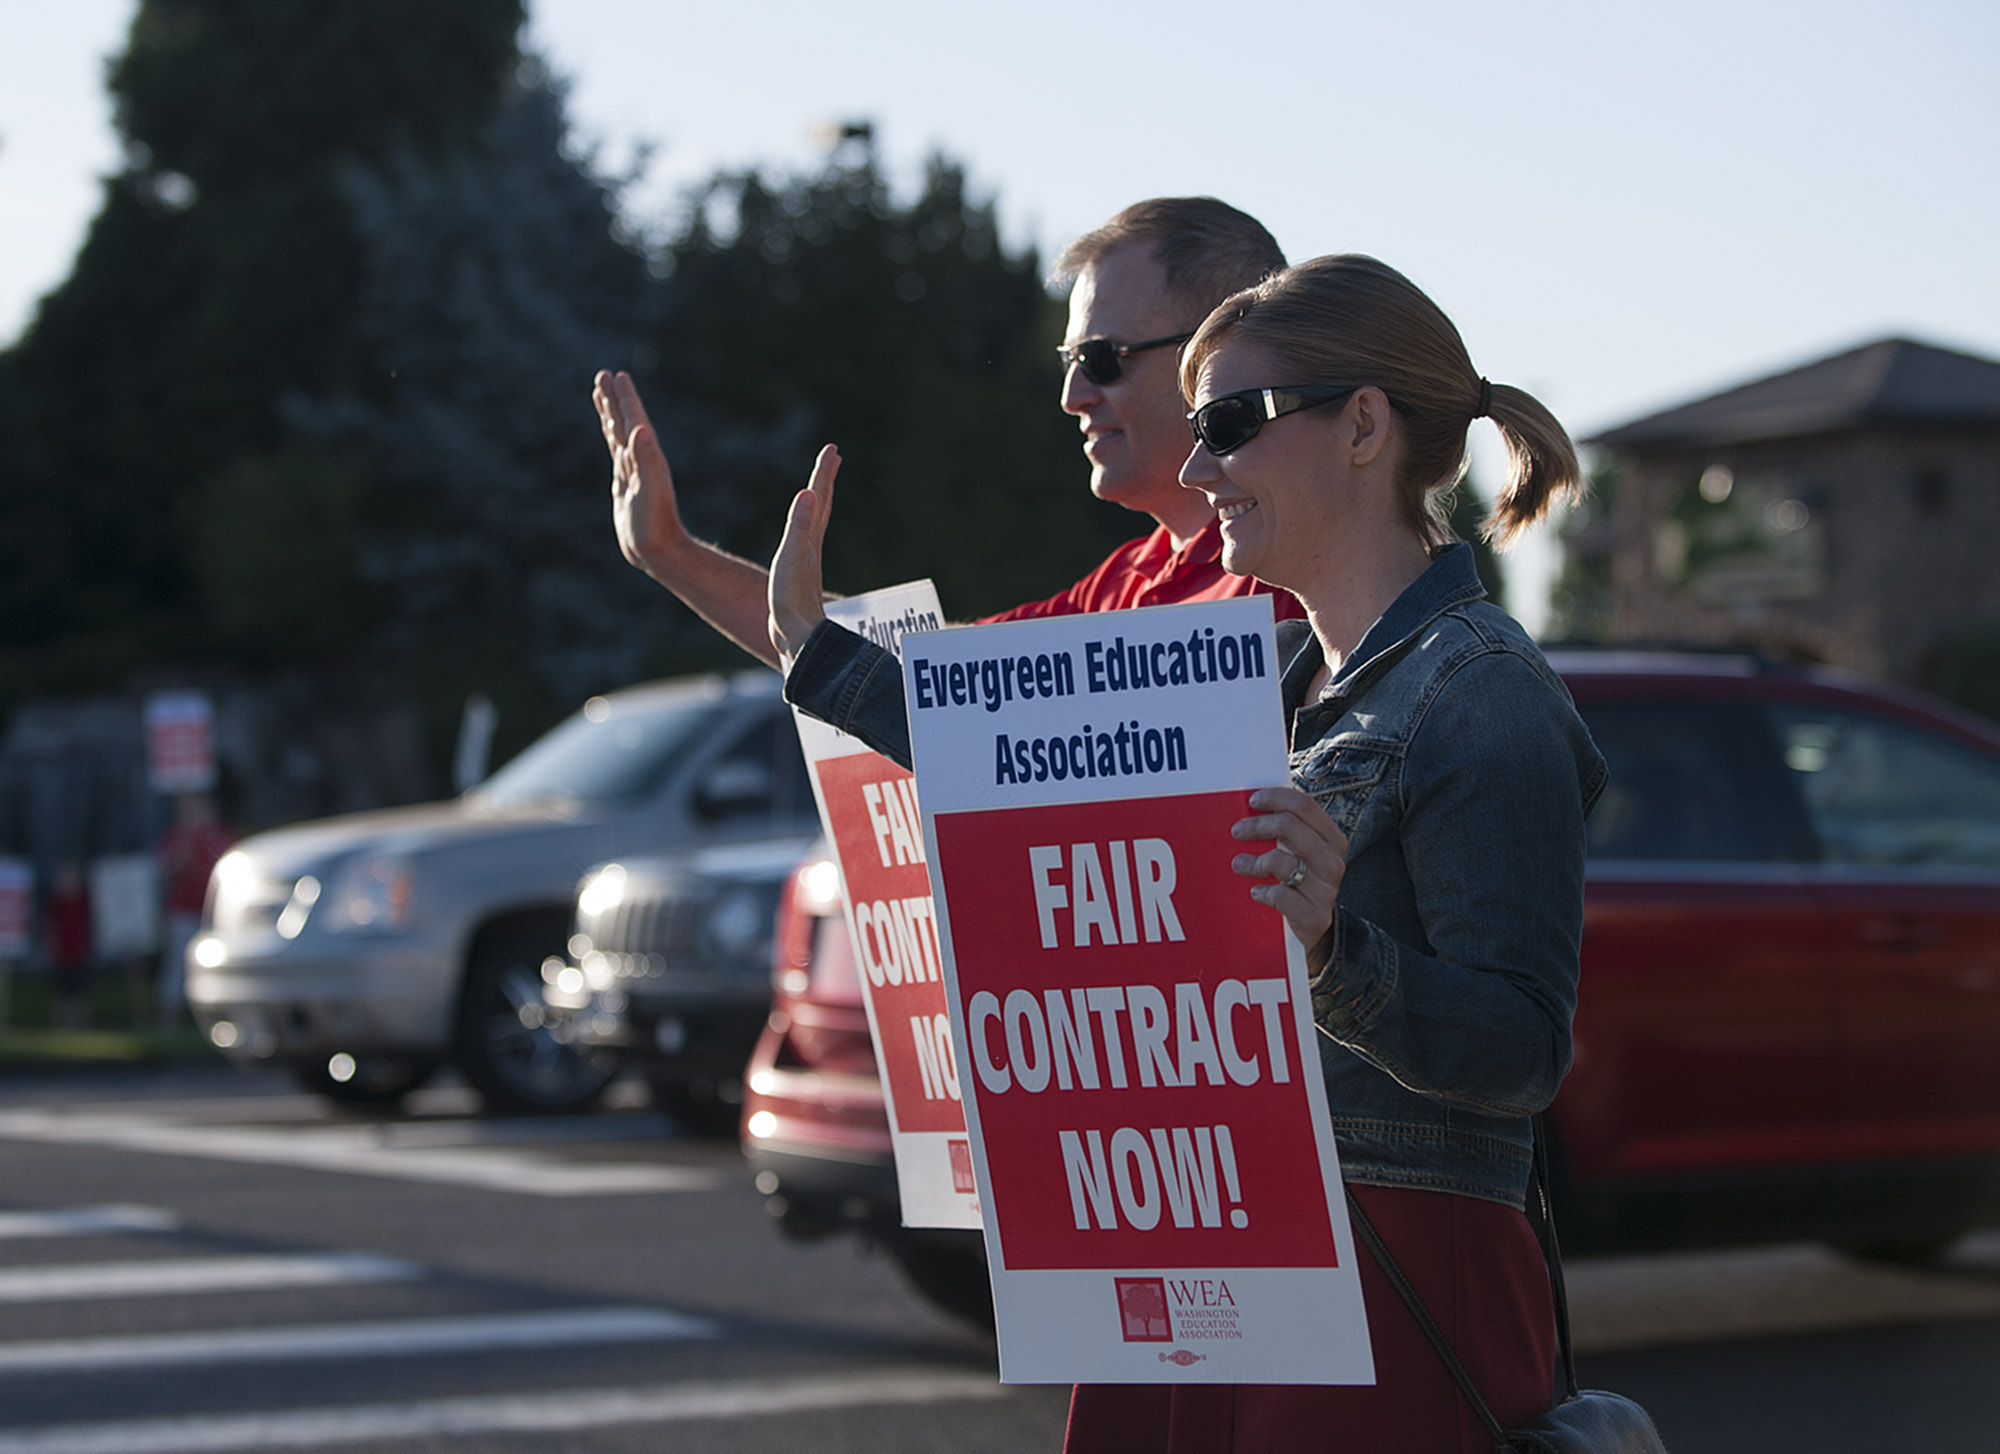 Cascade Middle School teacher Matt Mandrones, left, and his wife, Shawn Mandrones, a teacher at Hockinson Heights Elementary School, wave to drivers Friday morning, Aug. 19, 2016 in Southeast Vancouver.